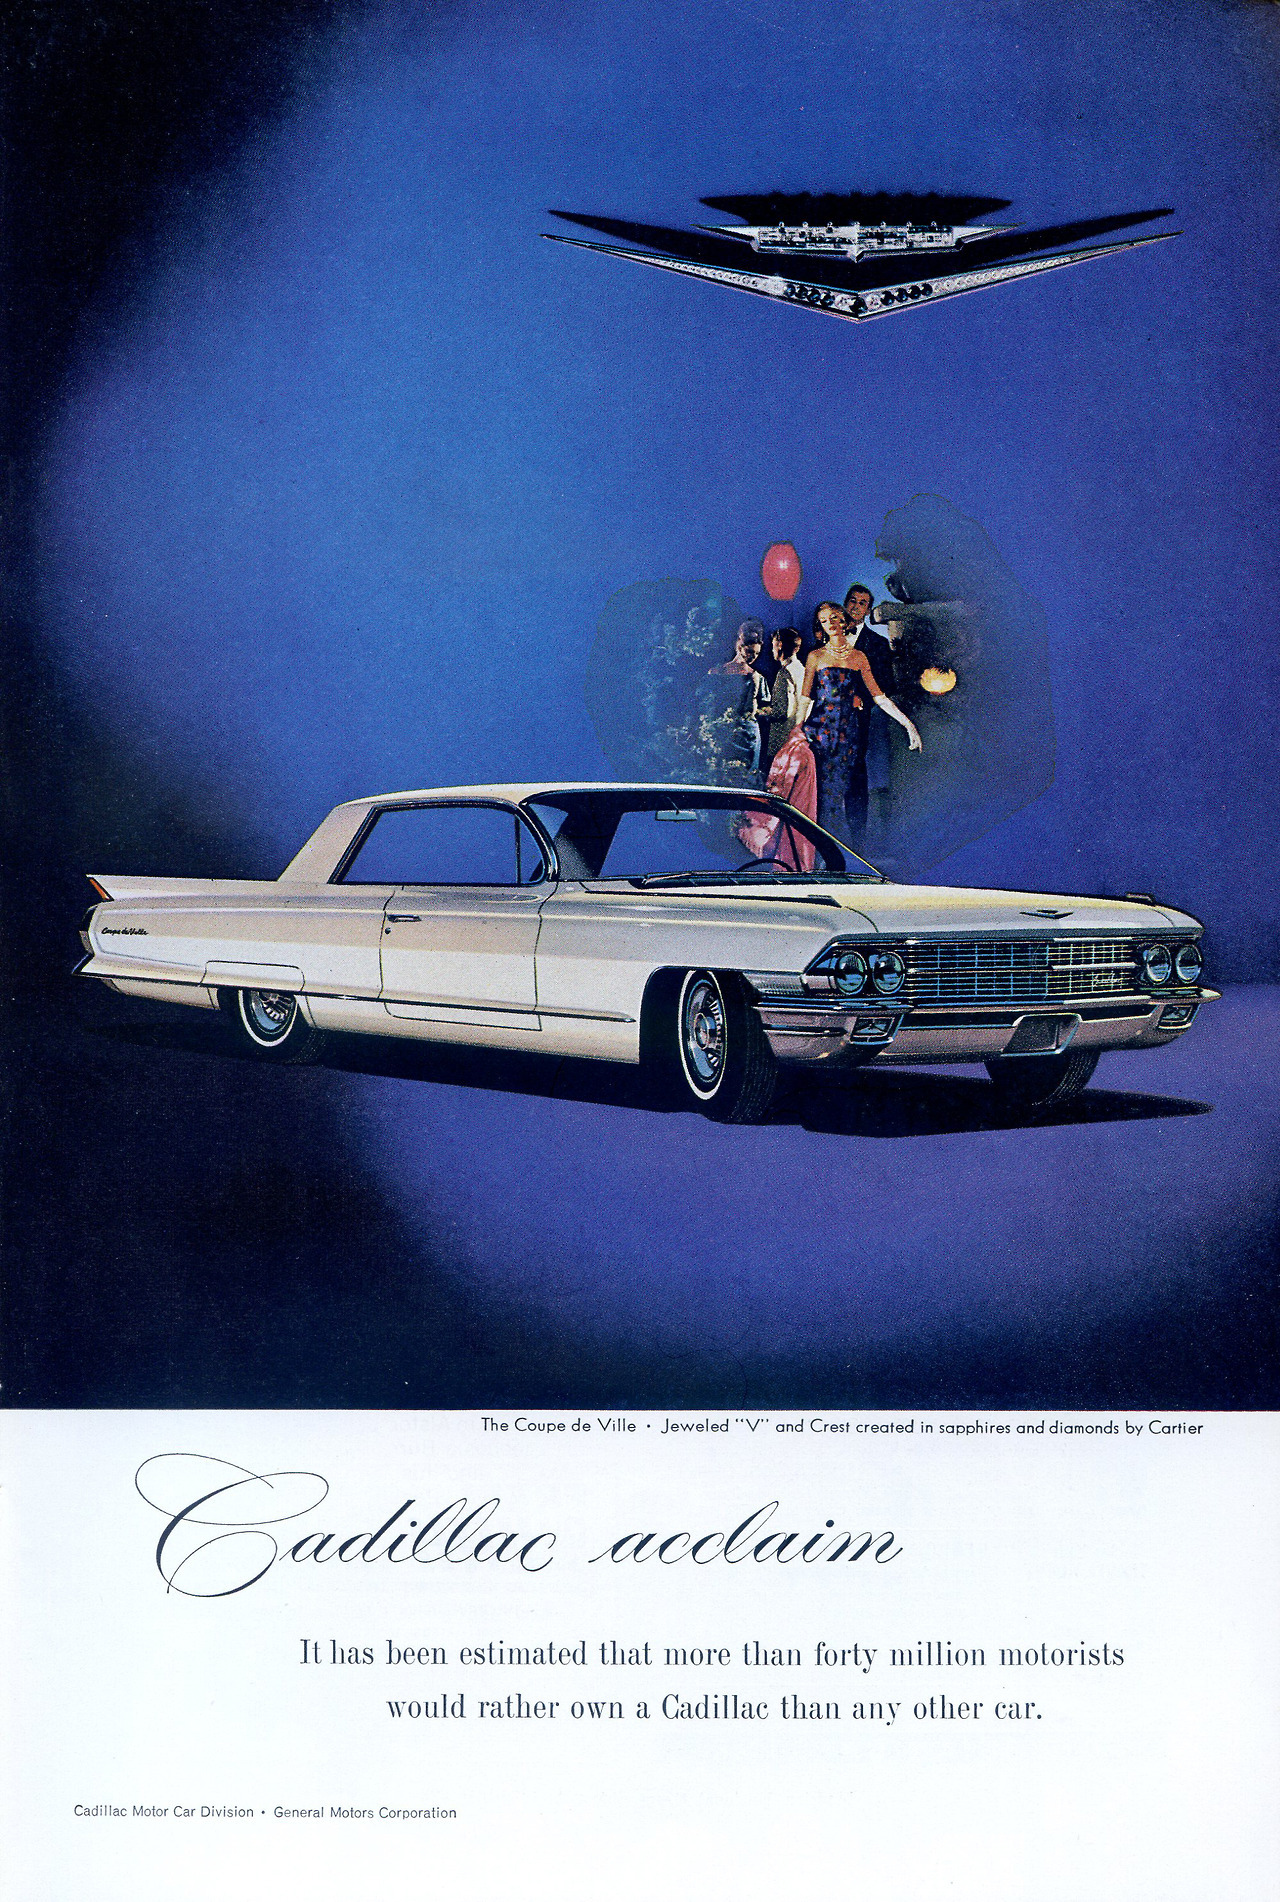 1962 Cadillac Coupe de Ville - published in National Geographic - May 1962